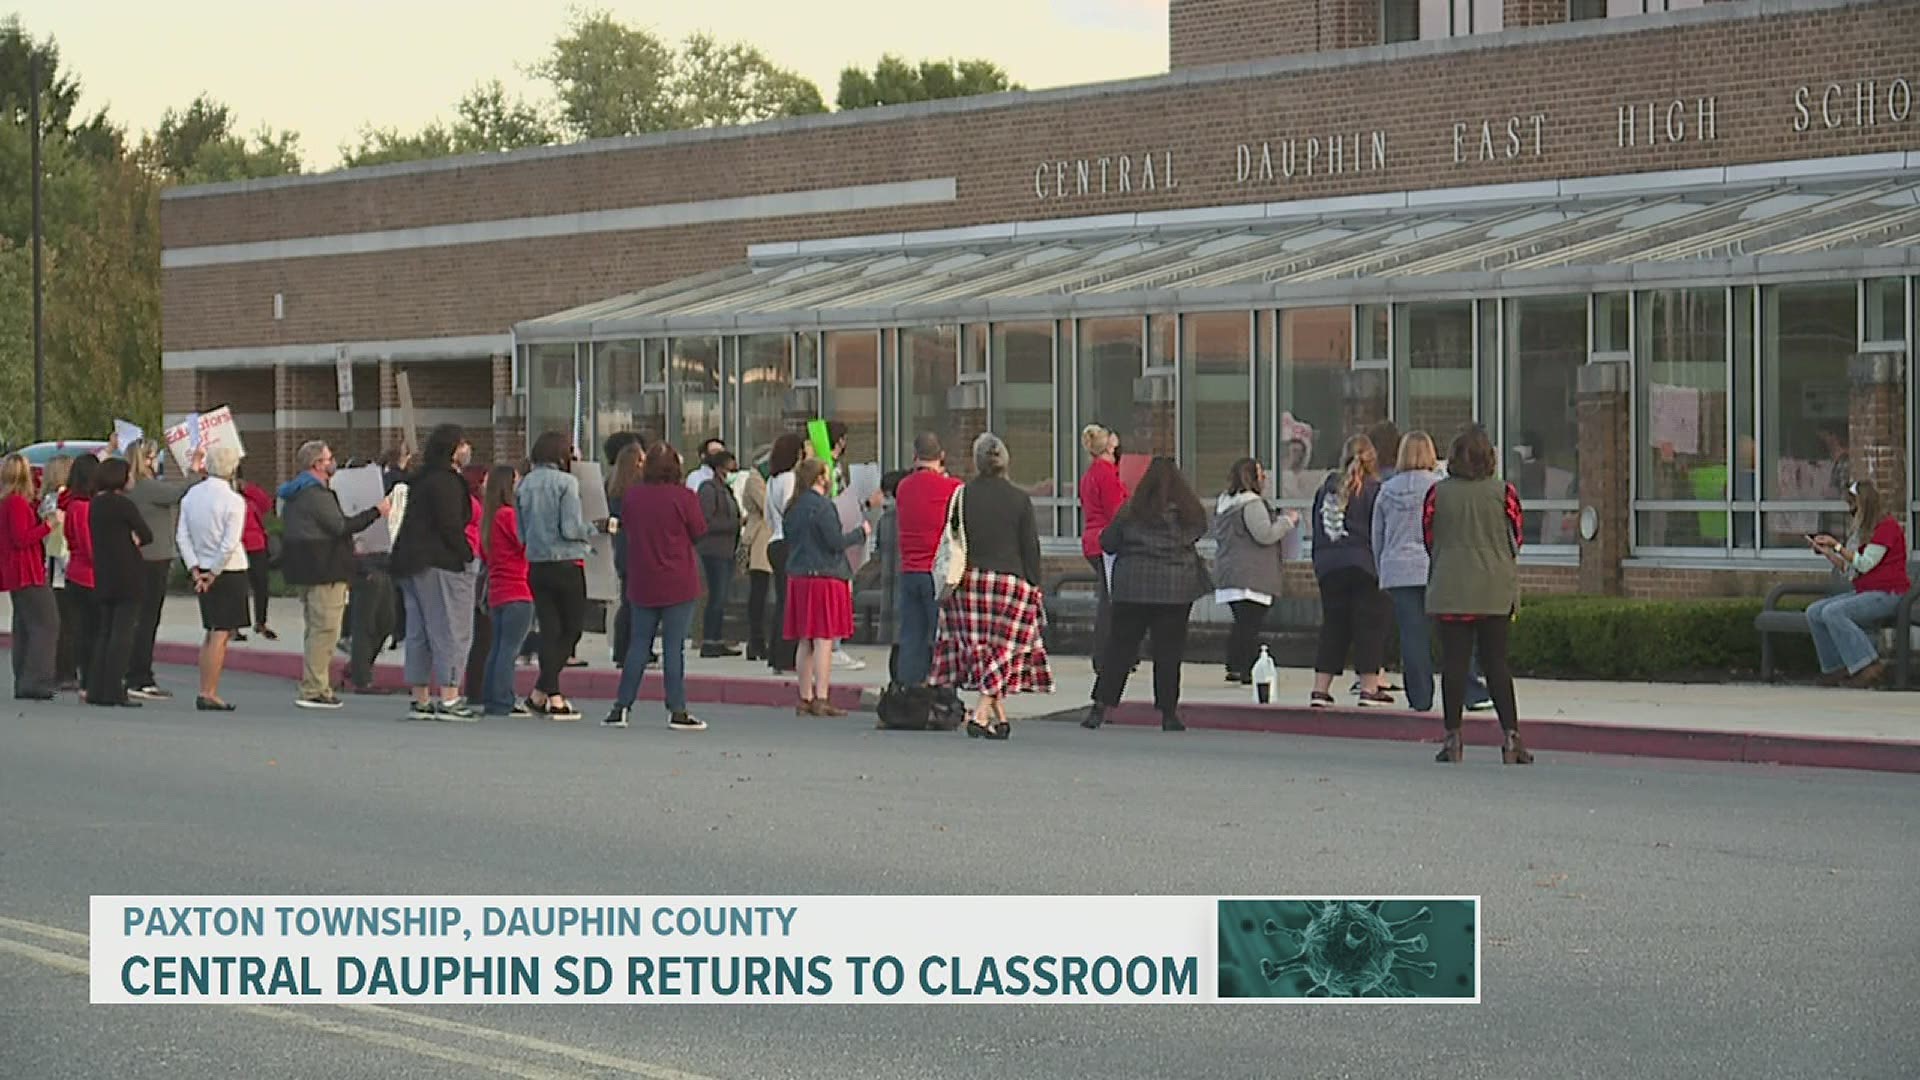 Central Dauphin School District voting tonight to transition back to full in-person learning.